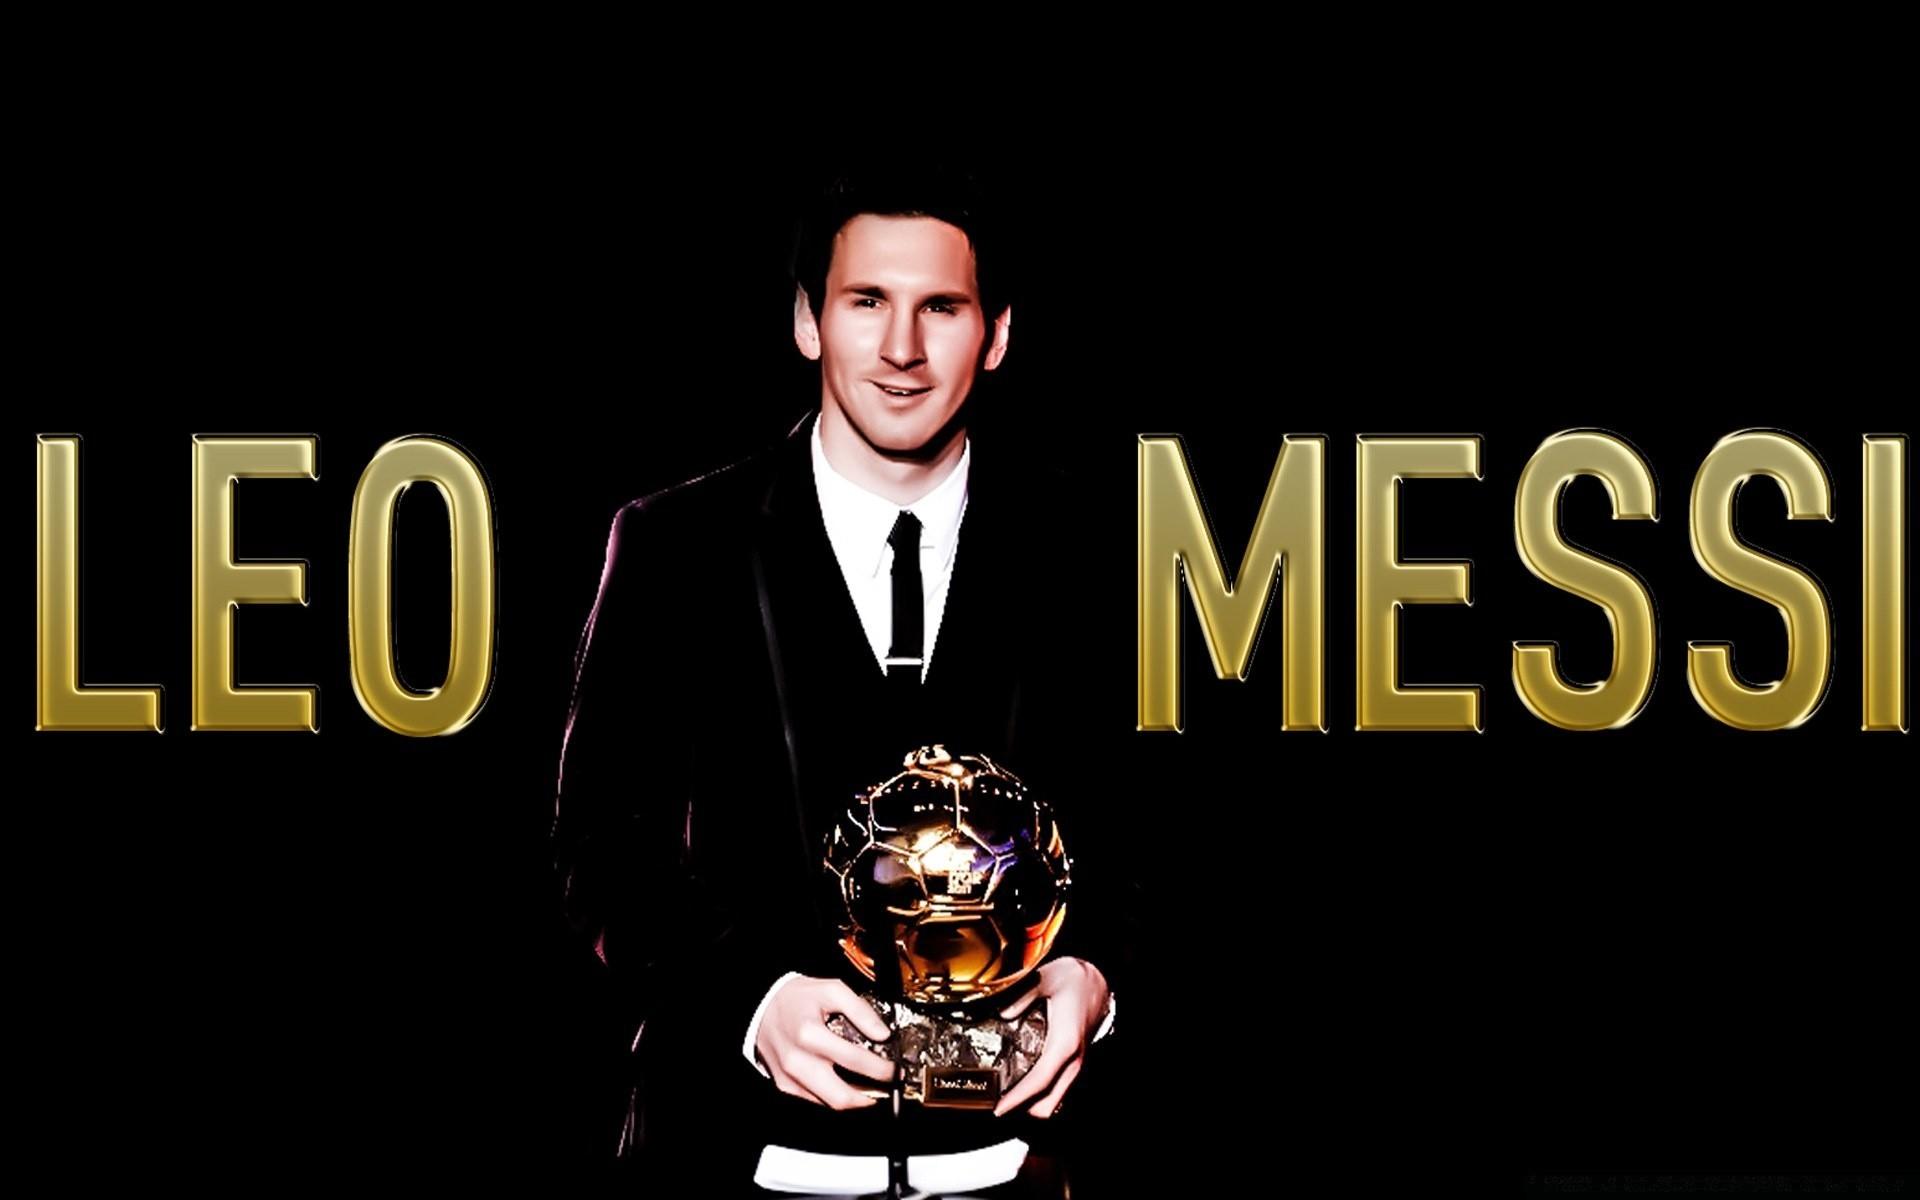 Messi with the Ballon d'or